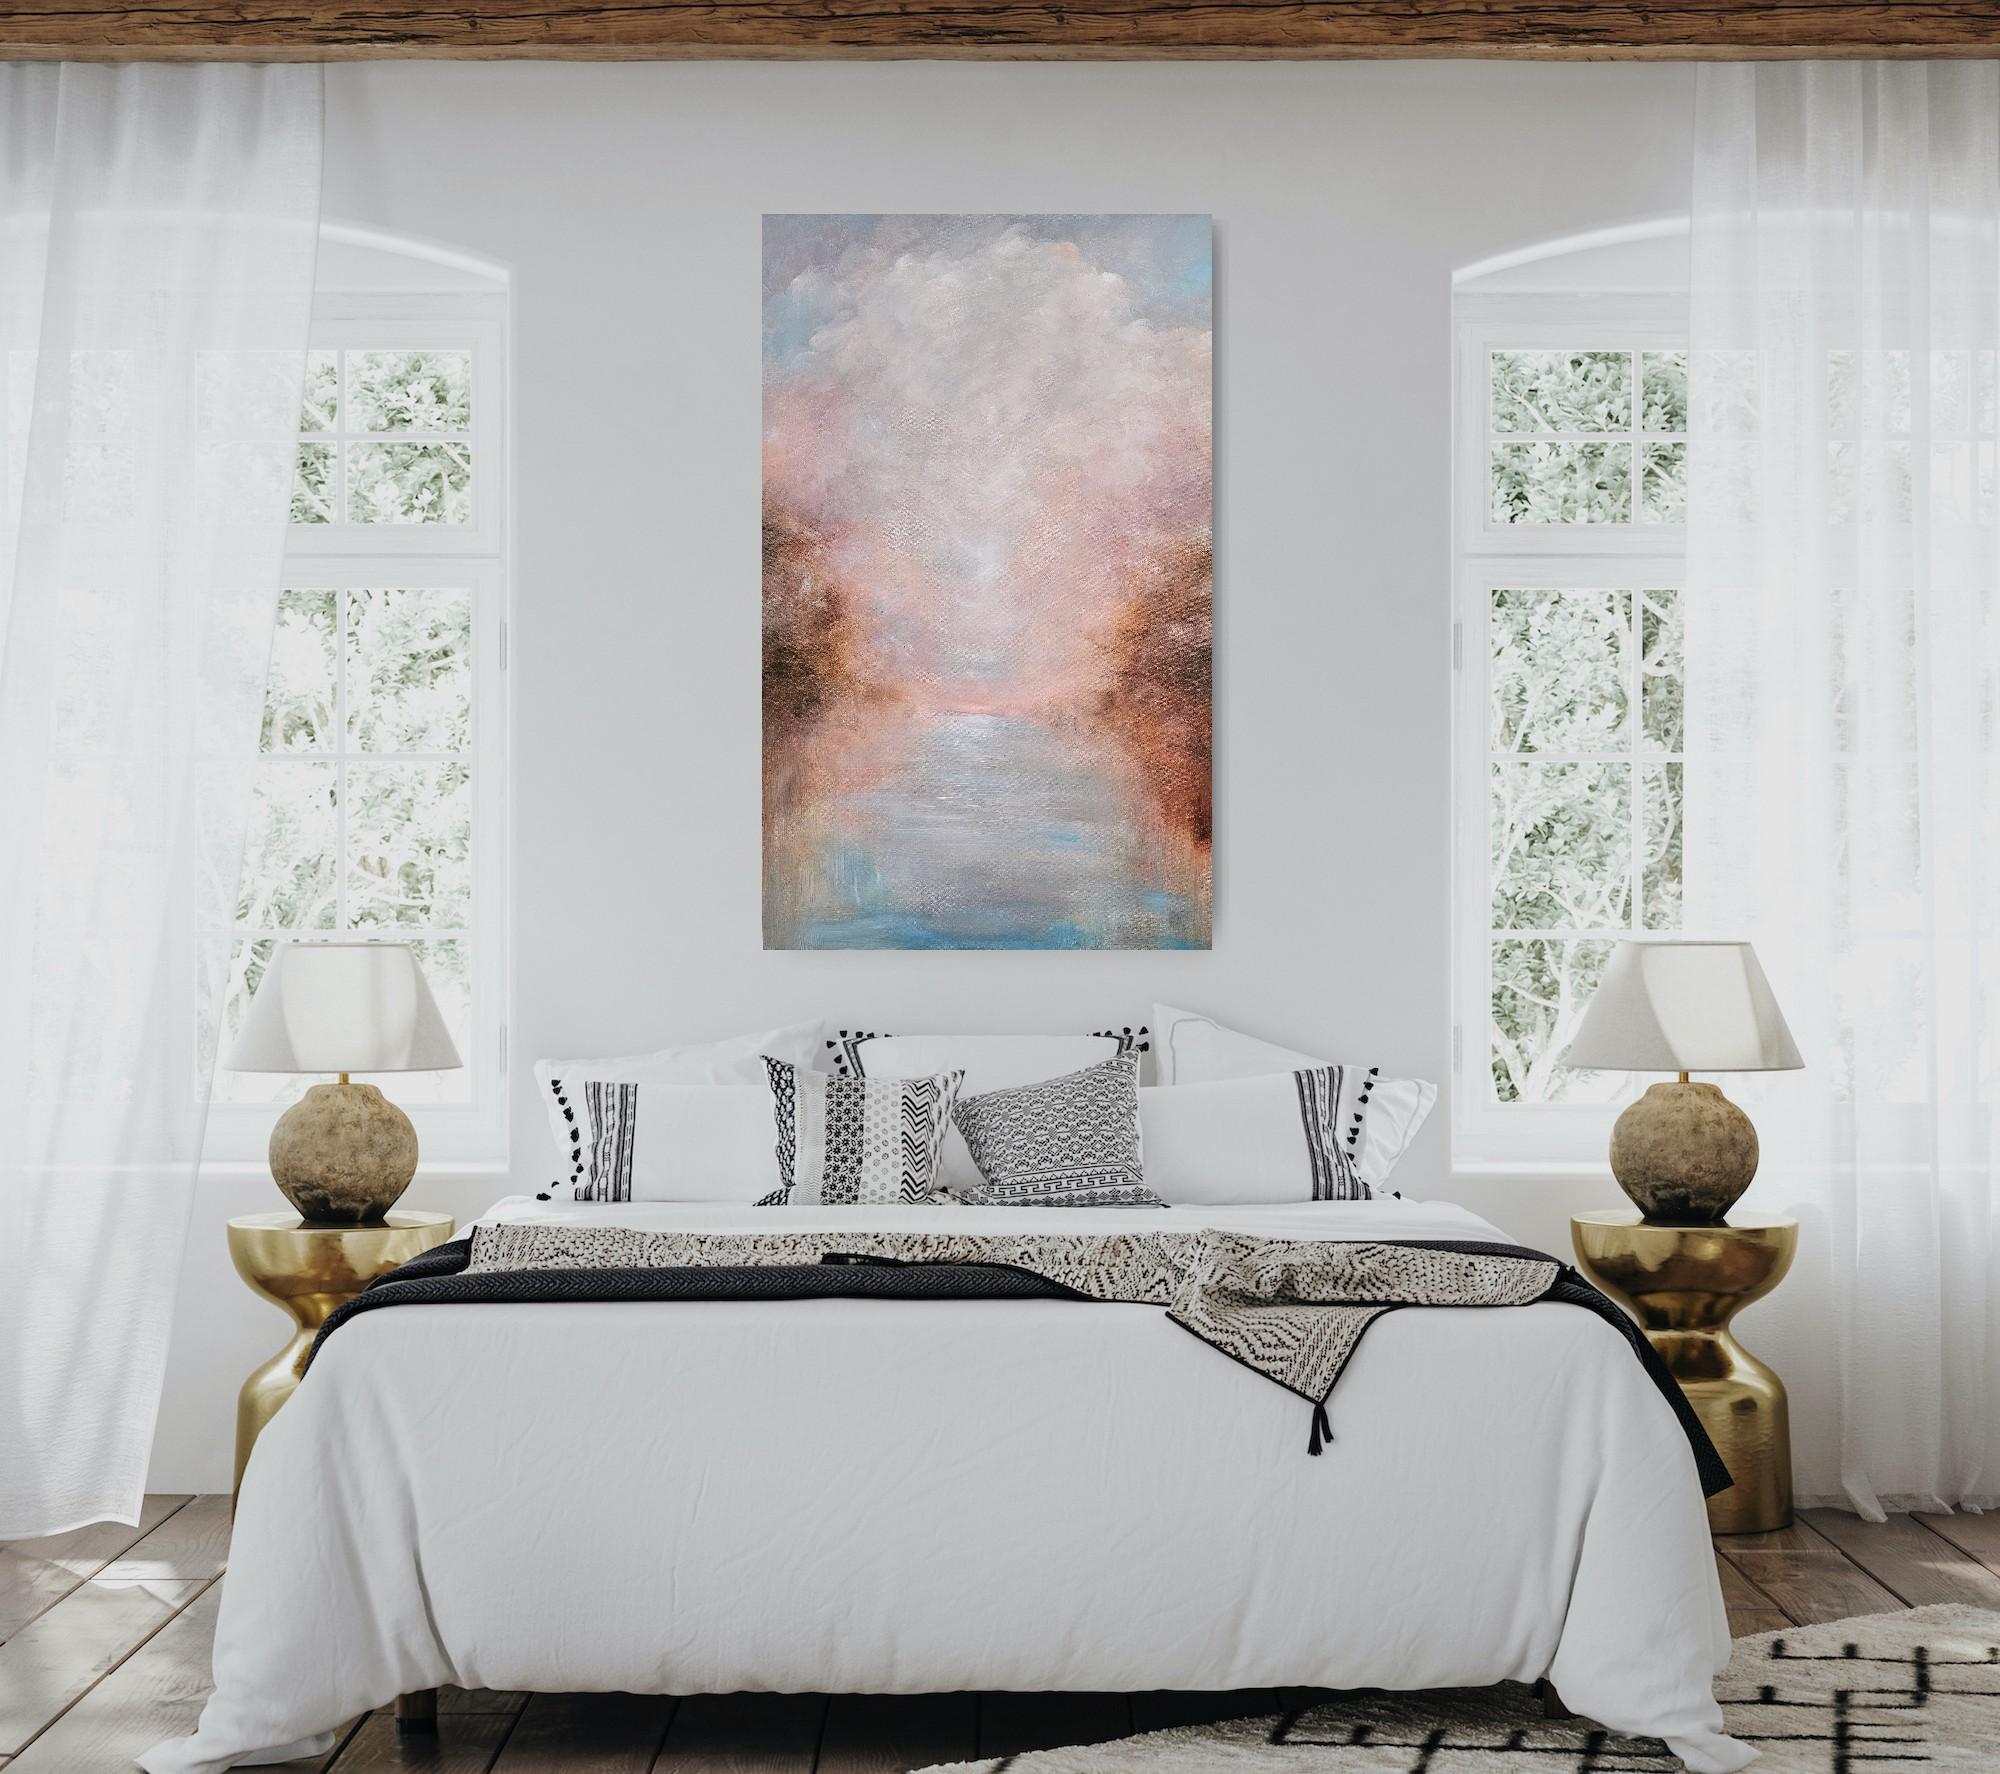 This is what hope feels like - Abstract atmospheric landscape water painting For Sale 10